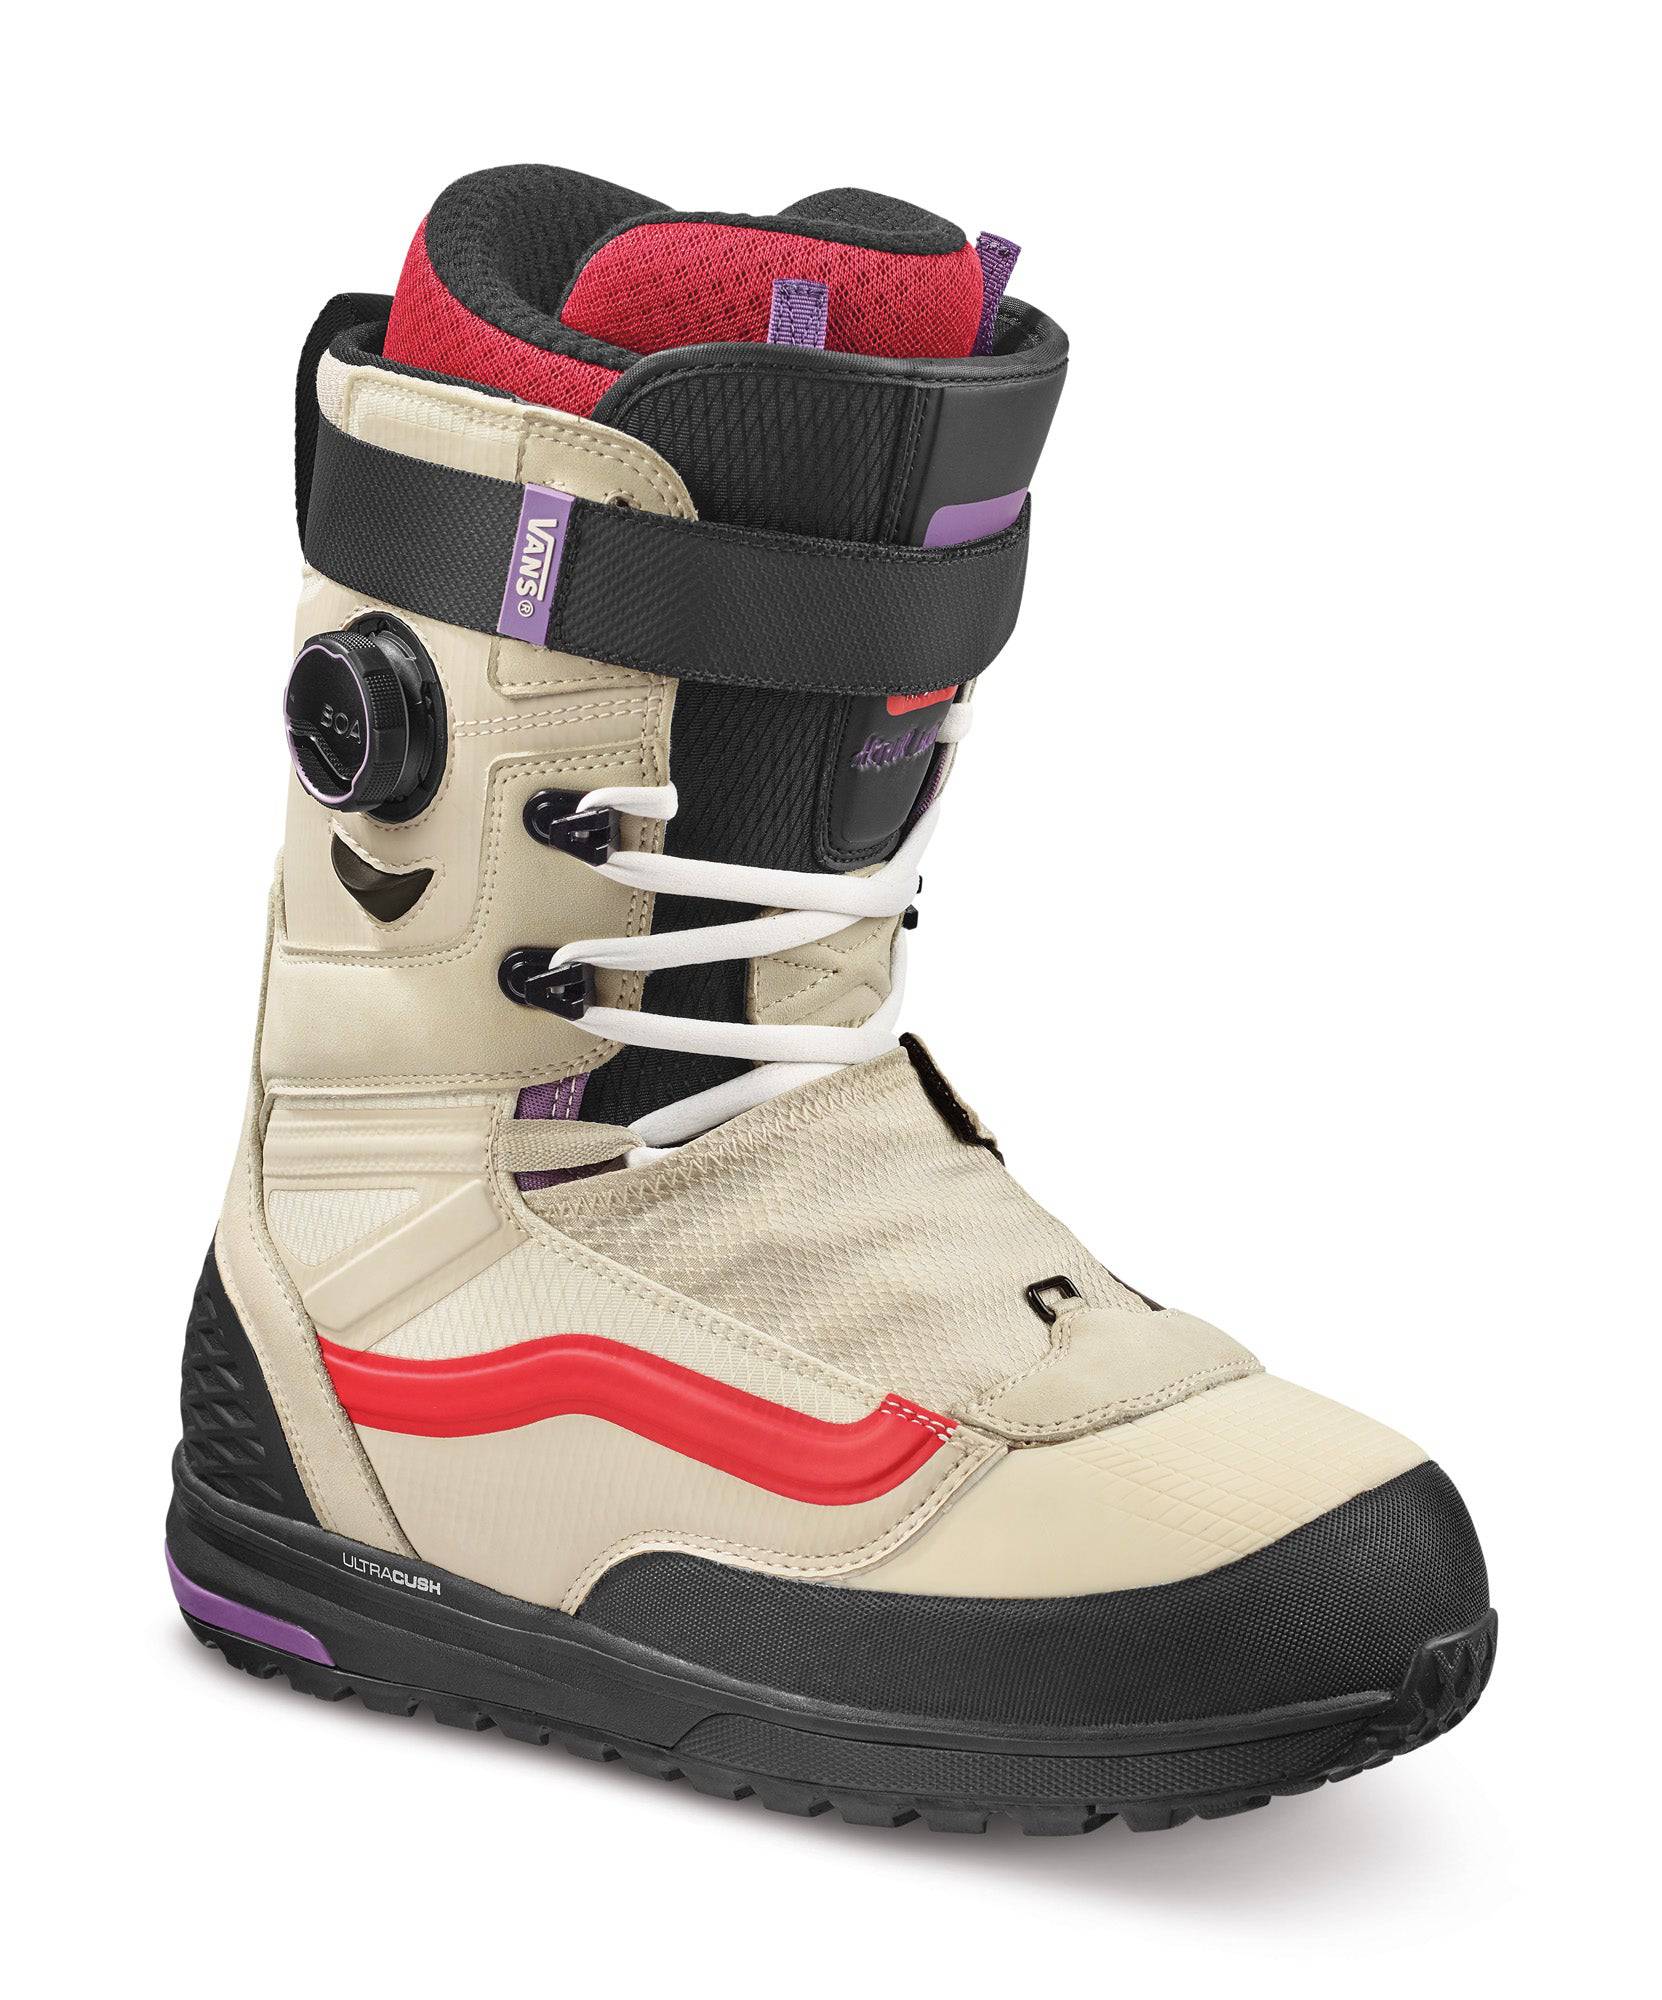 2022 Vans Infuse Snowboard Boot in 